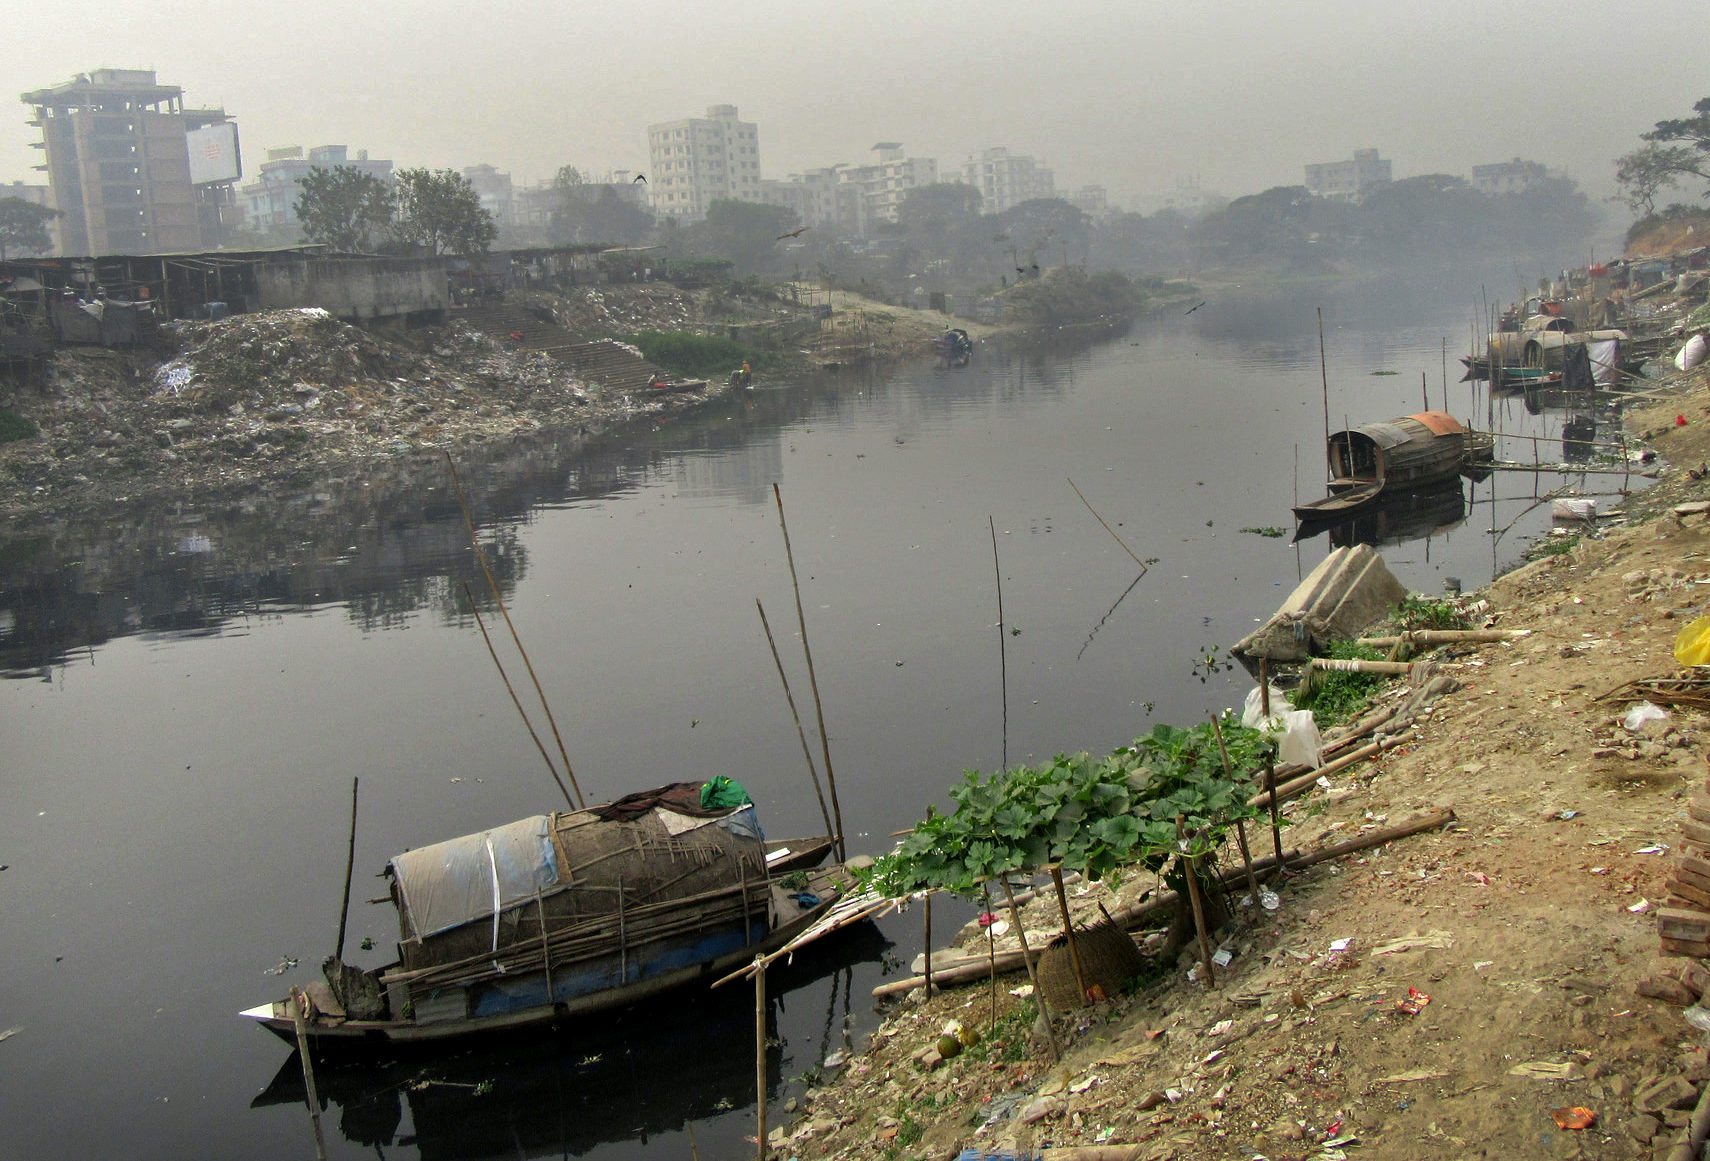 Pollution of Dhaka water ways; CRedit: Sonia Hoque/REACH